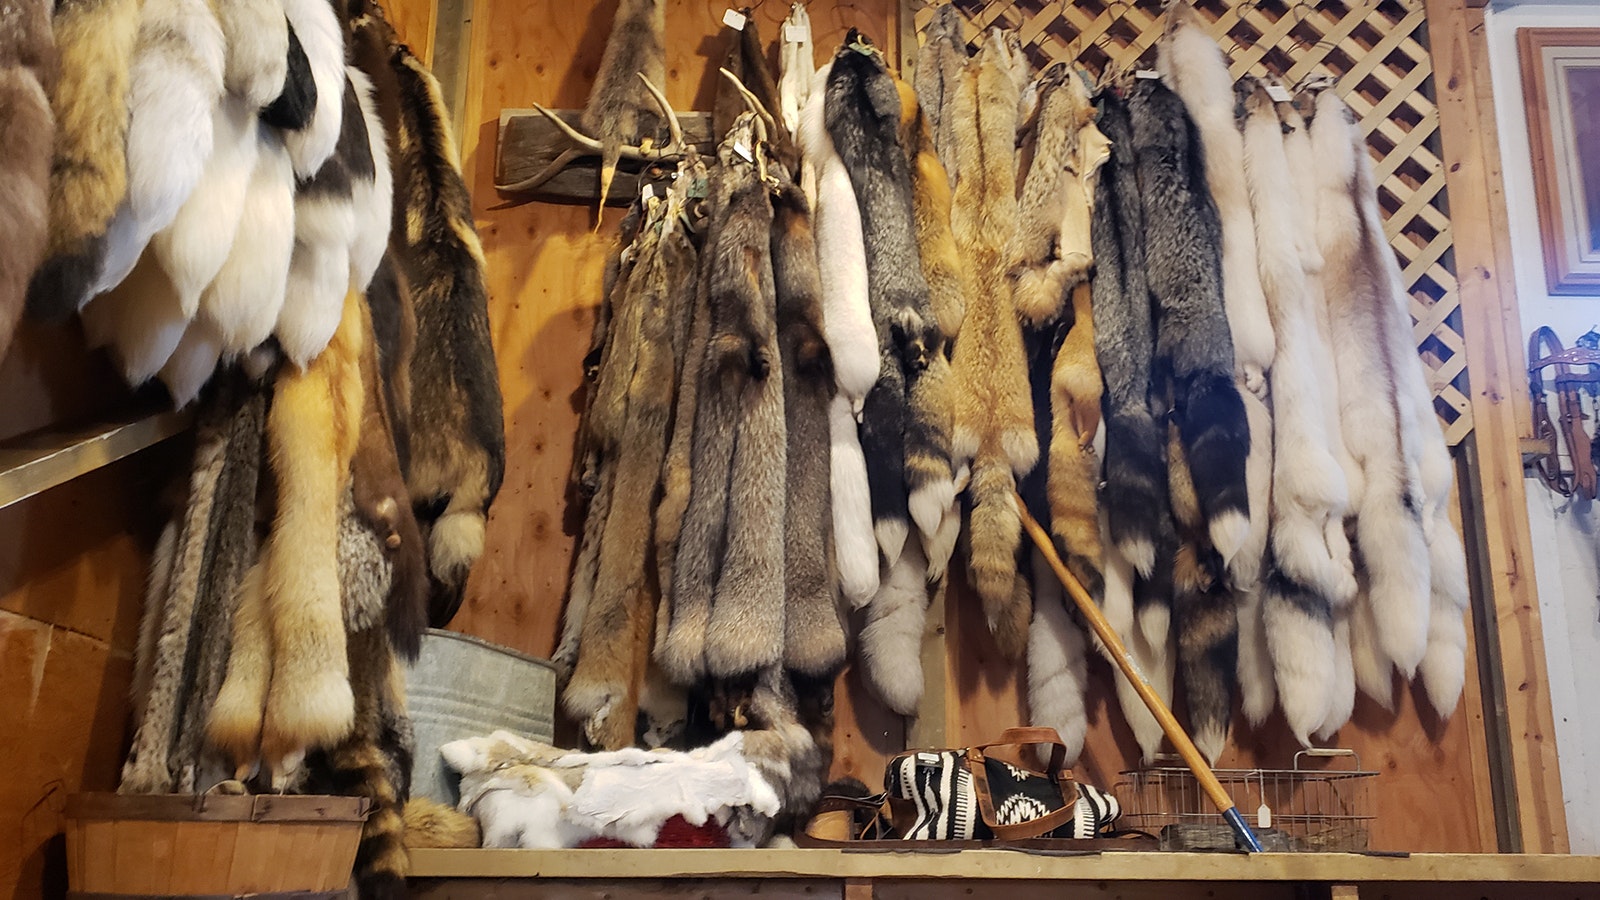 A collection of furs greet customers walking up the stairs to the second floor of the Aladdin General Store where most of the antiques are.